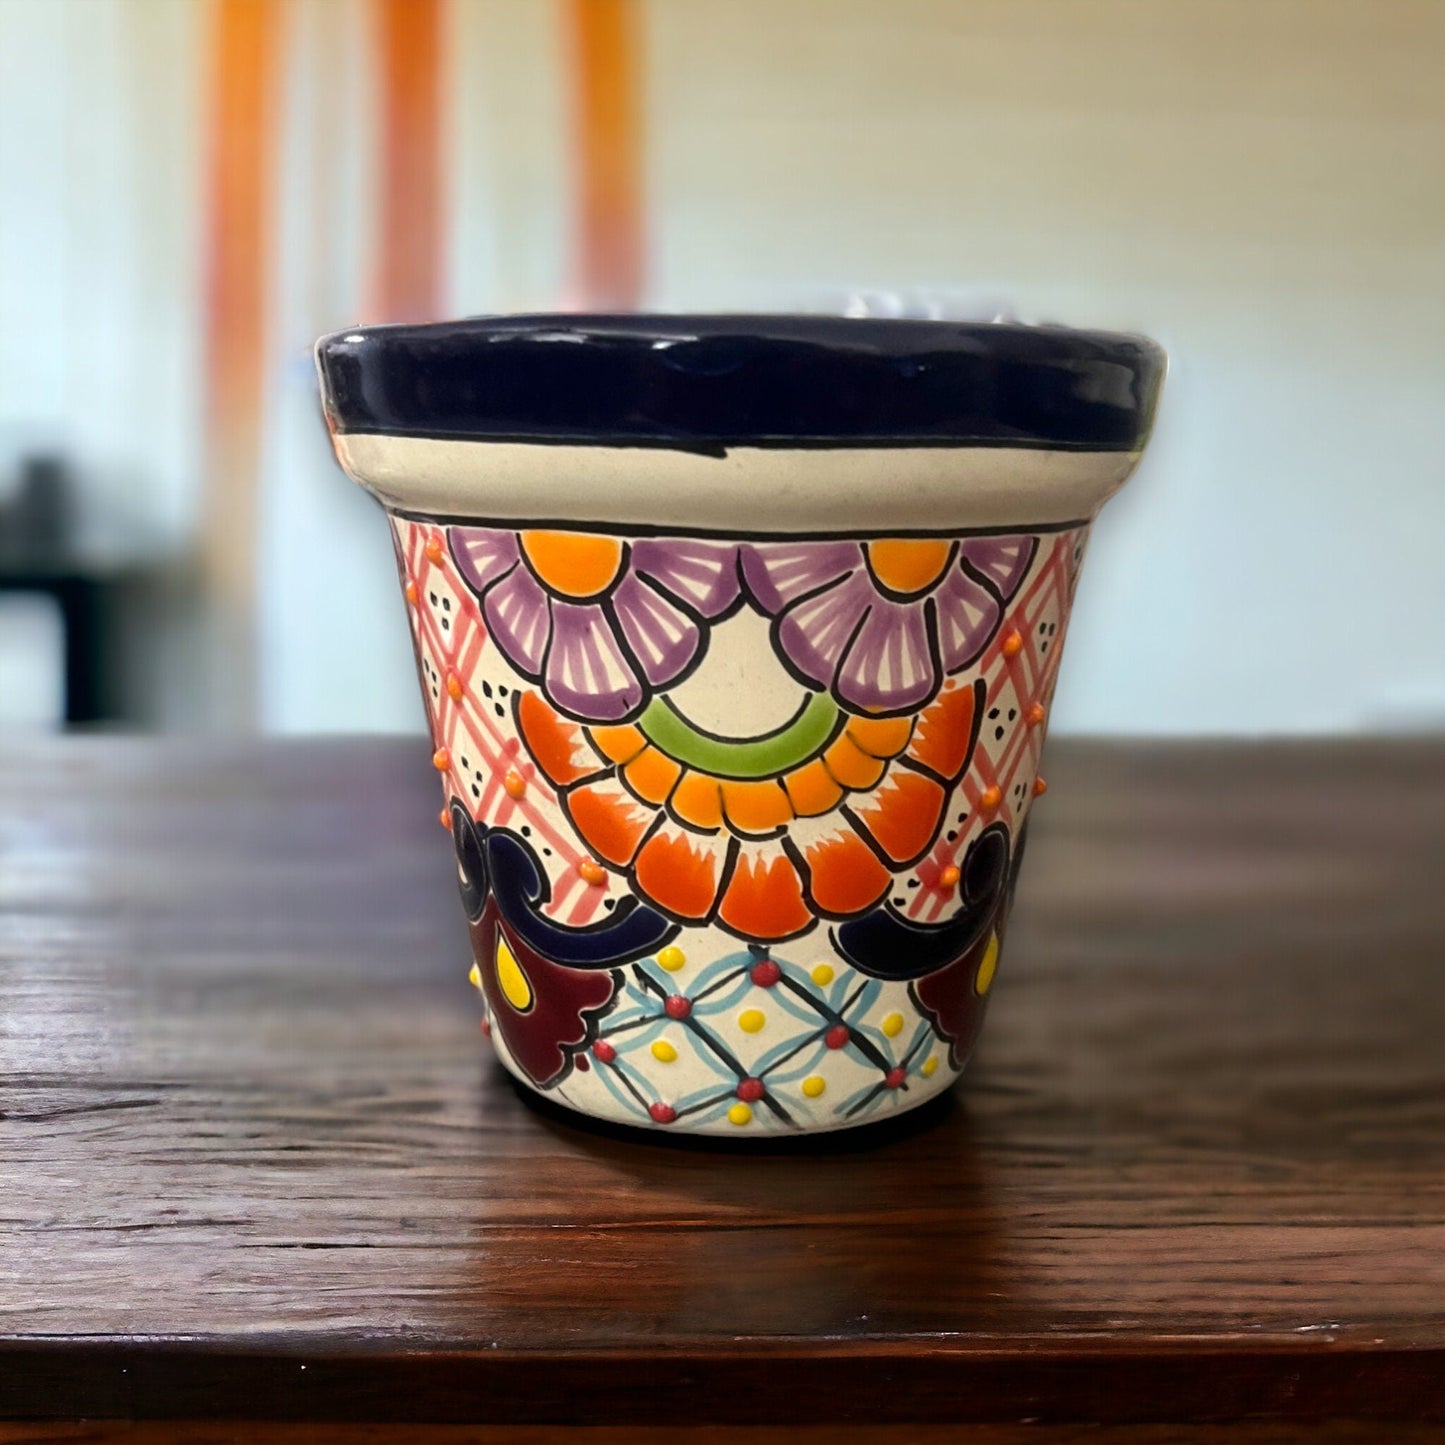 Set of 3 Colorful Talavera Flower Pot Set | Hand-Painted Mexican Planters